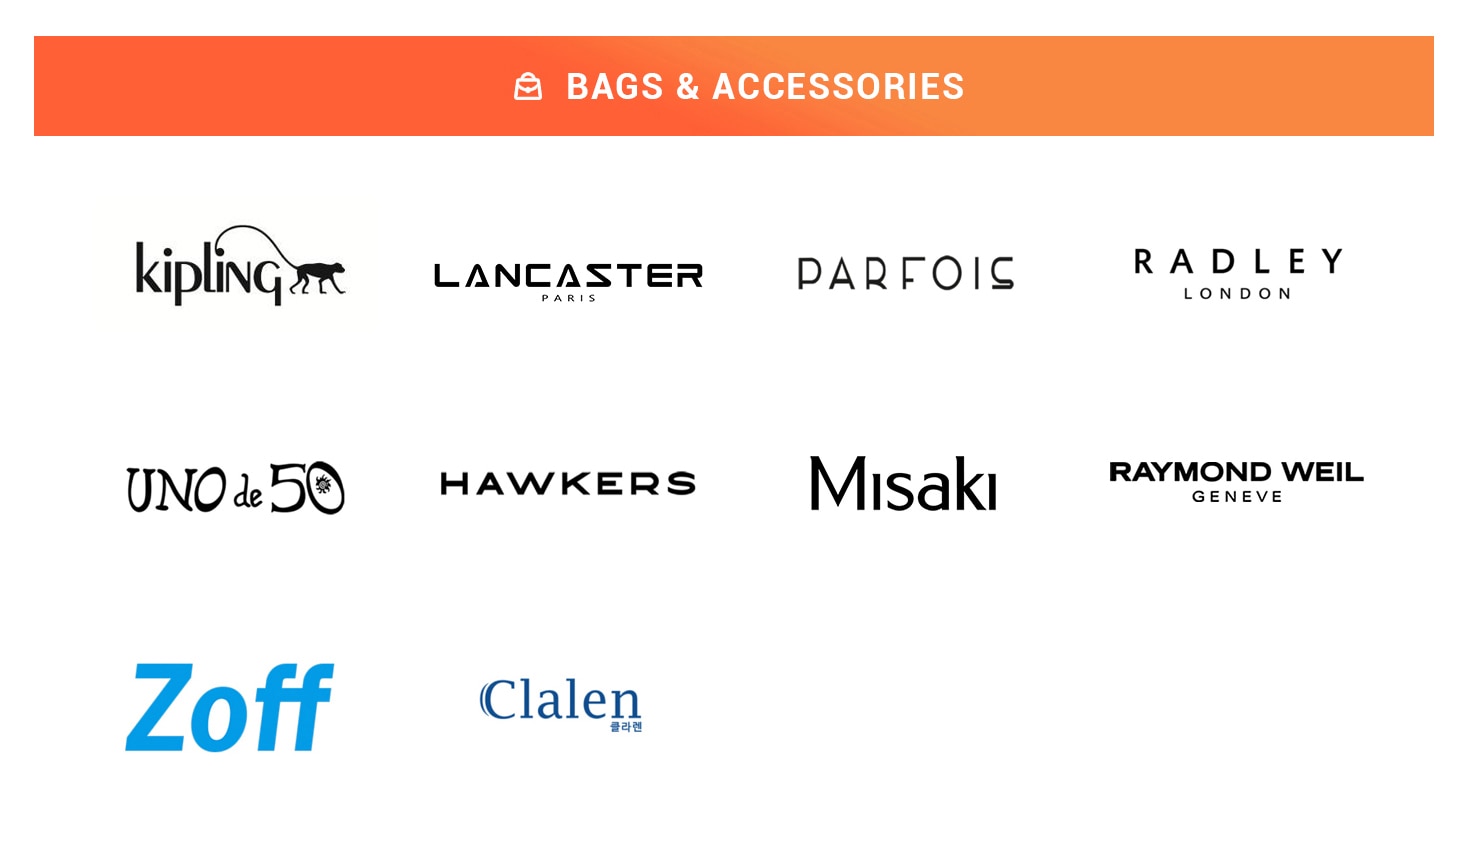 4. Bags & Accessories